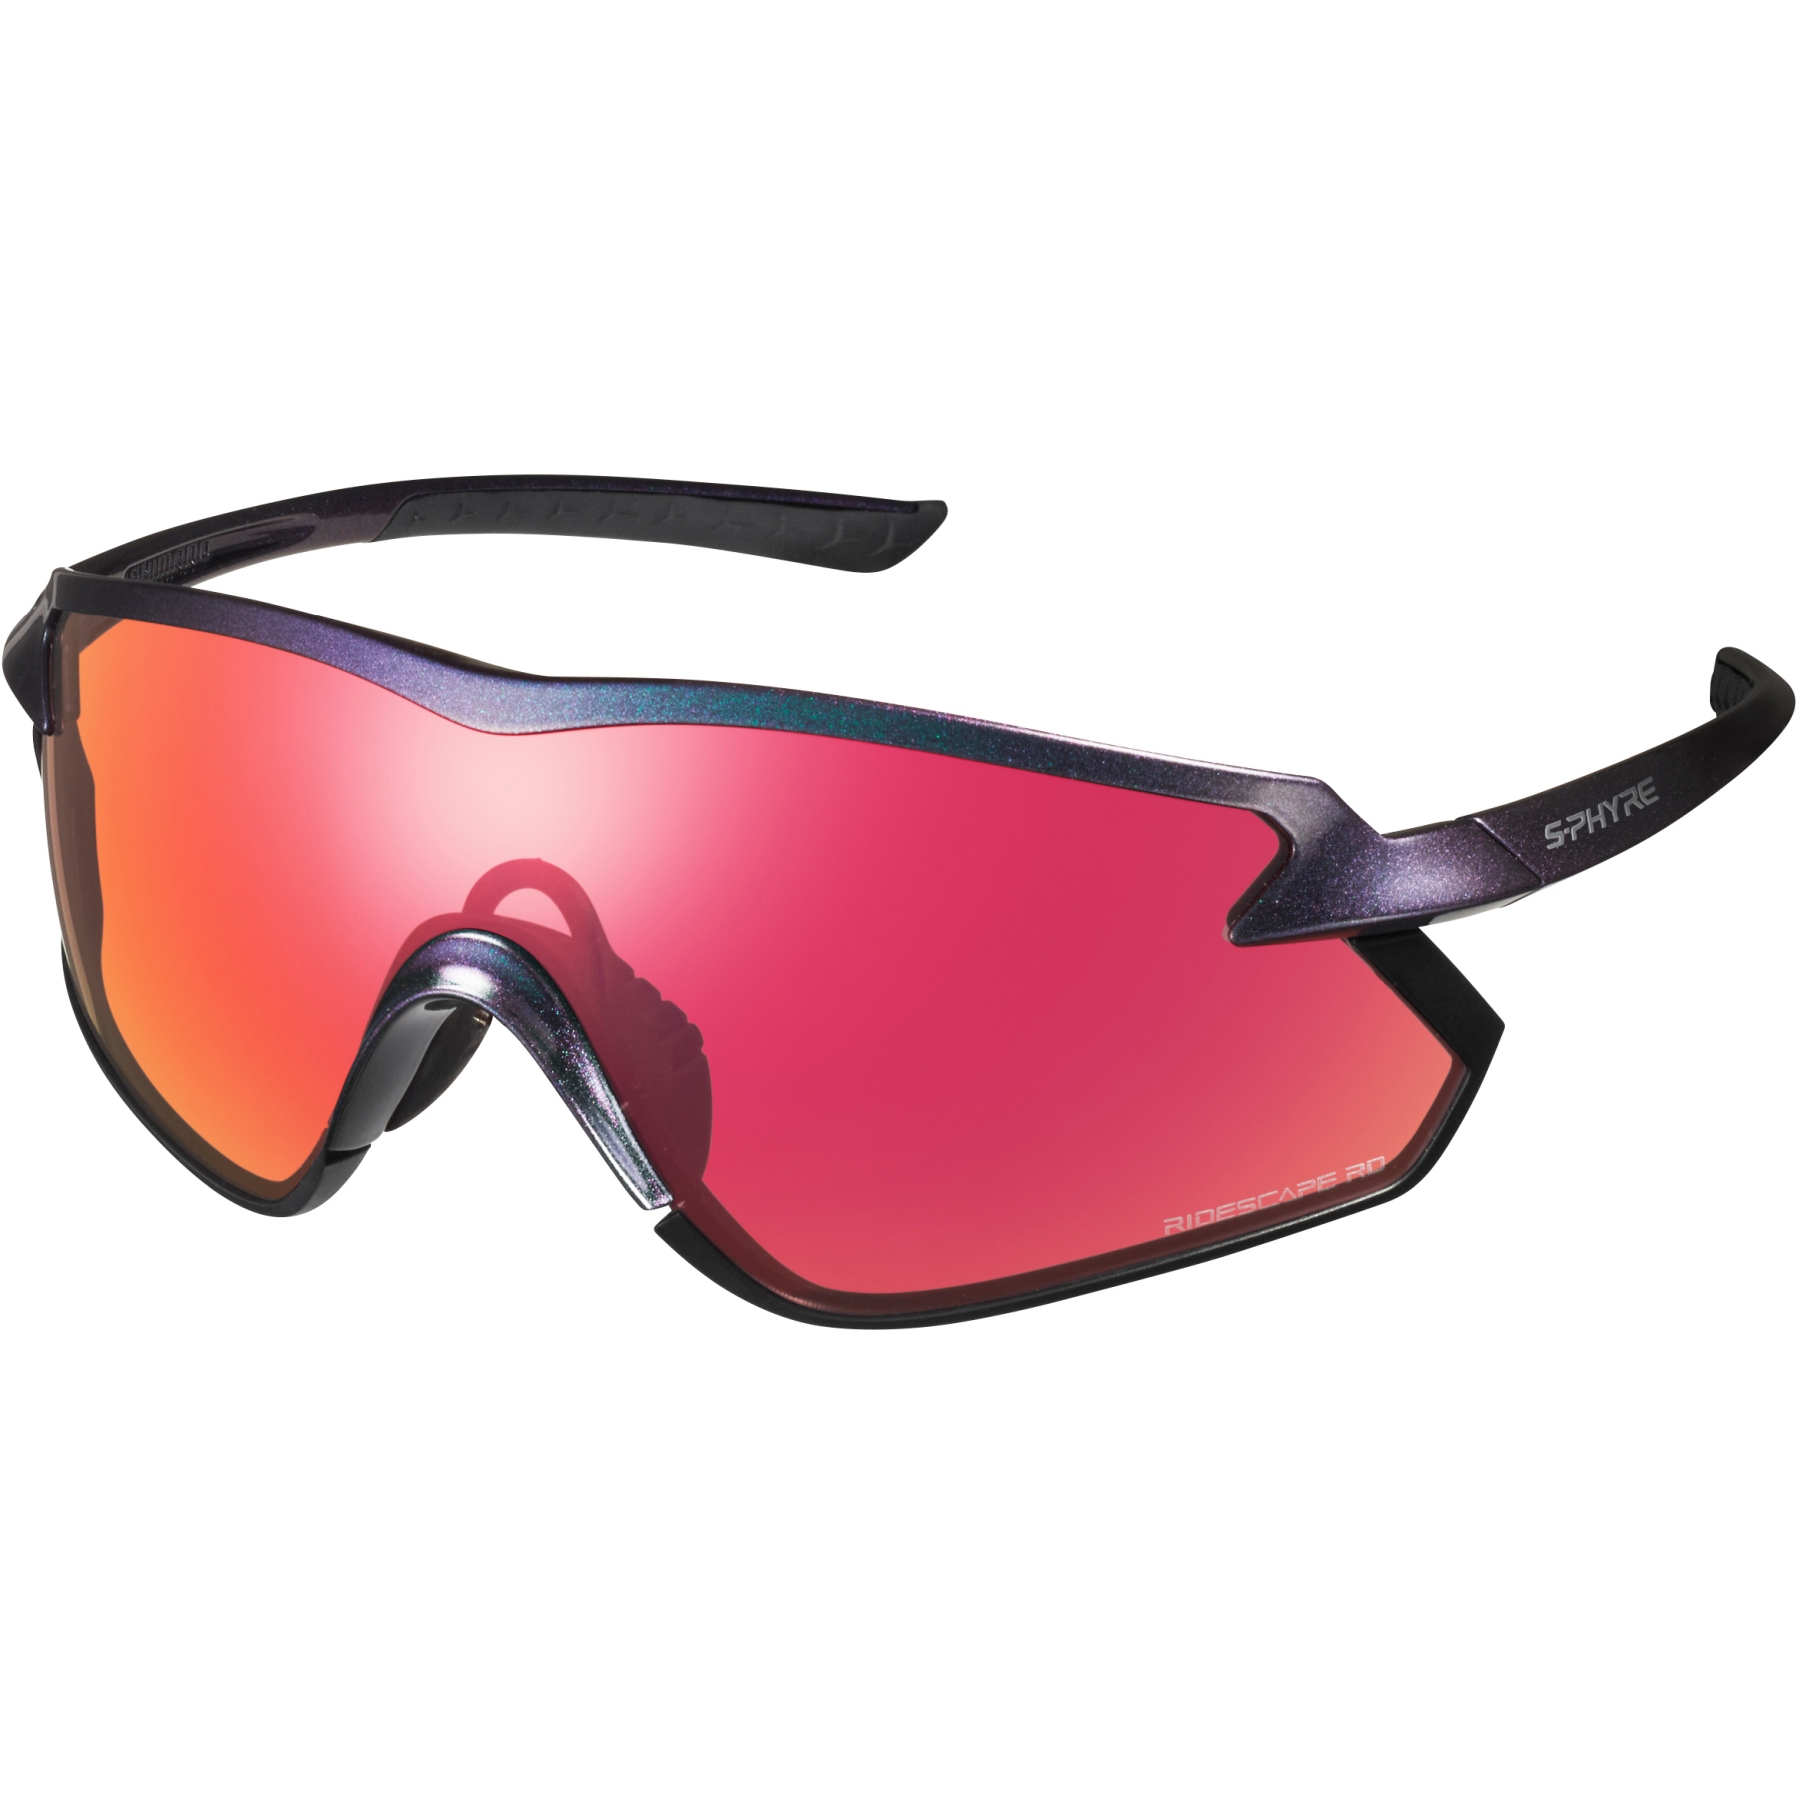 Picture of Shimano S-Phyre X Glasses - Gloss Chameleon - Ridescape Road / Clear